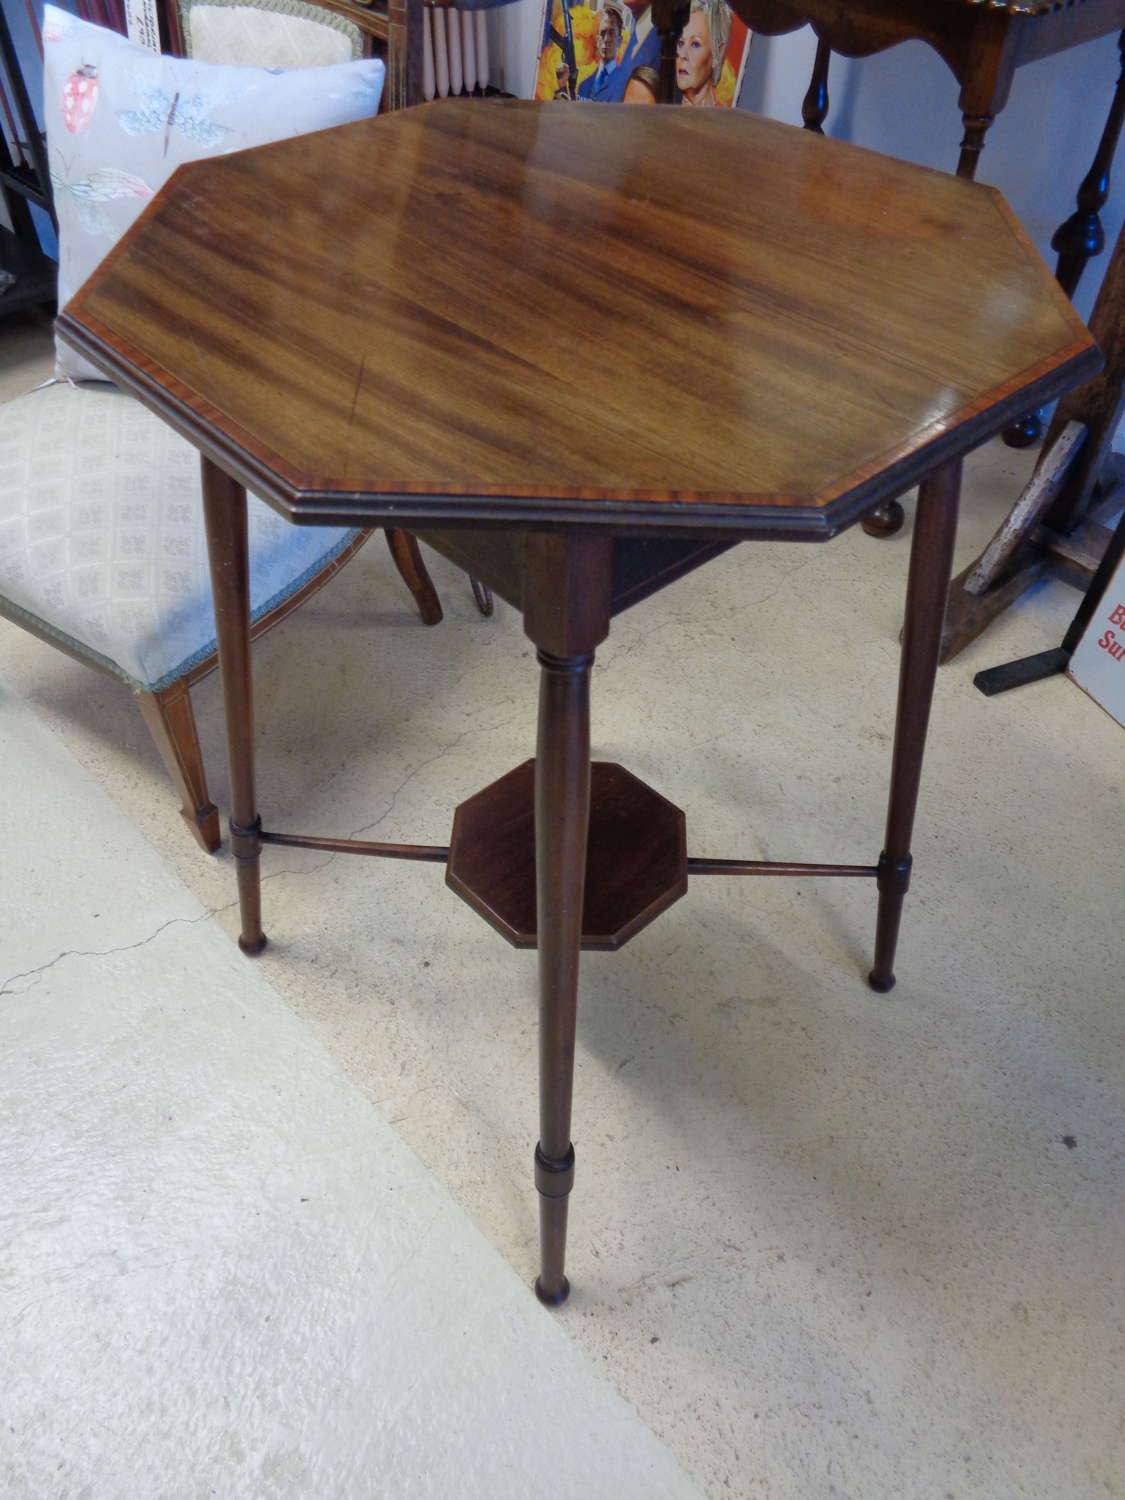 Edwardian Octagonal Table with Satinwood Inlay